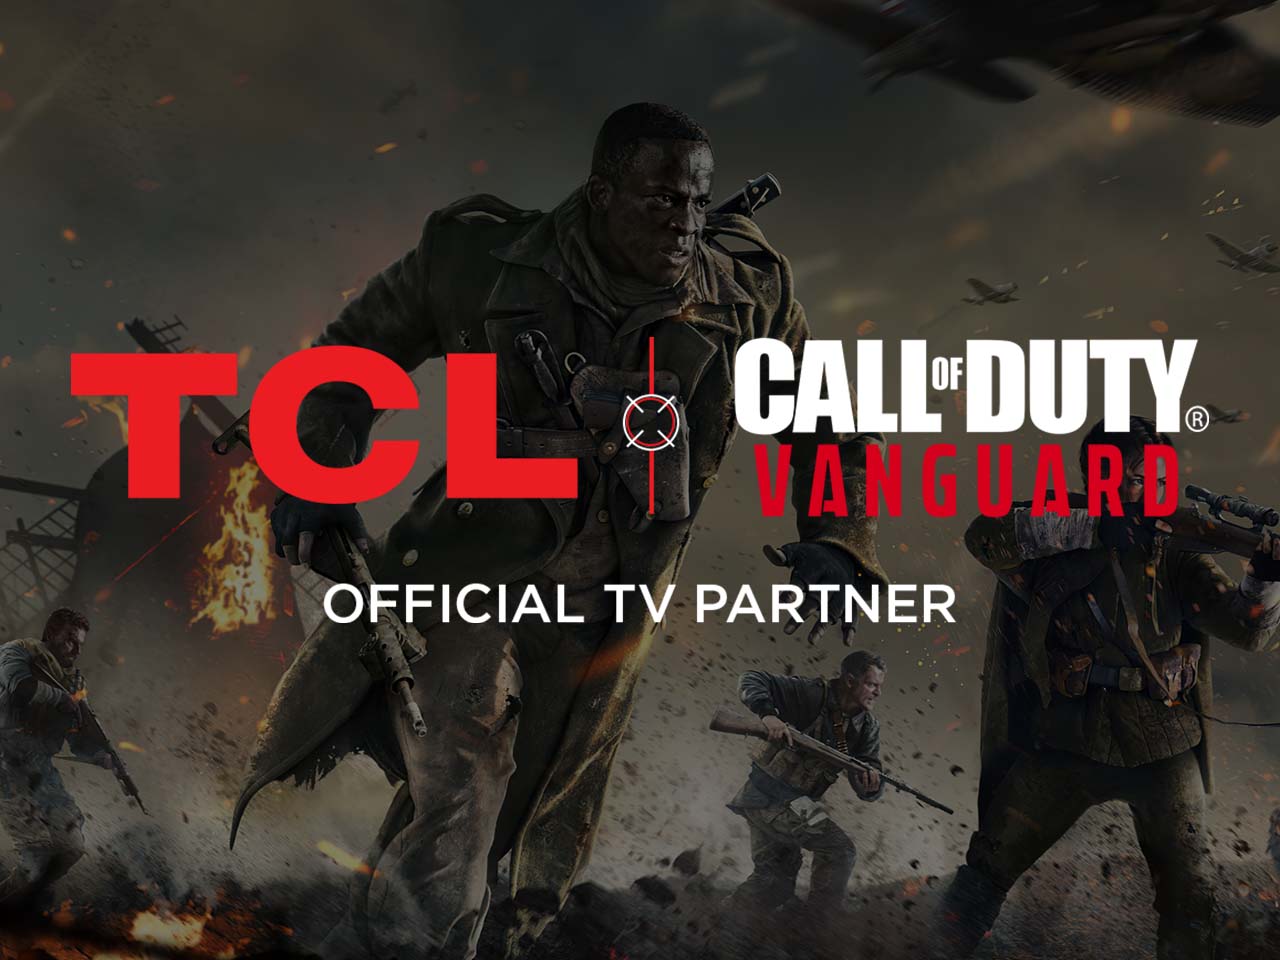 TCL ELECTRONICS STRENGTHENS COMMITMENT TO GAMING AS OFFICIAL TV PARTNER OF CALL OF DUTY®: VANGUARD